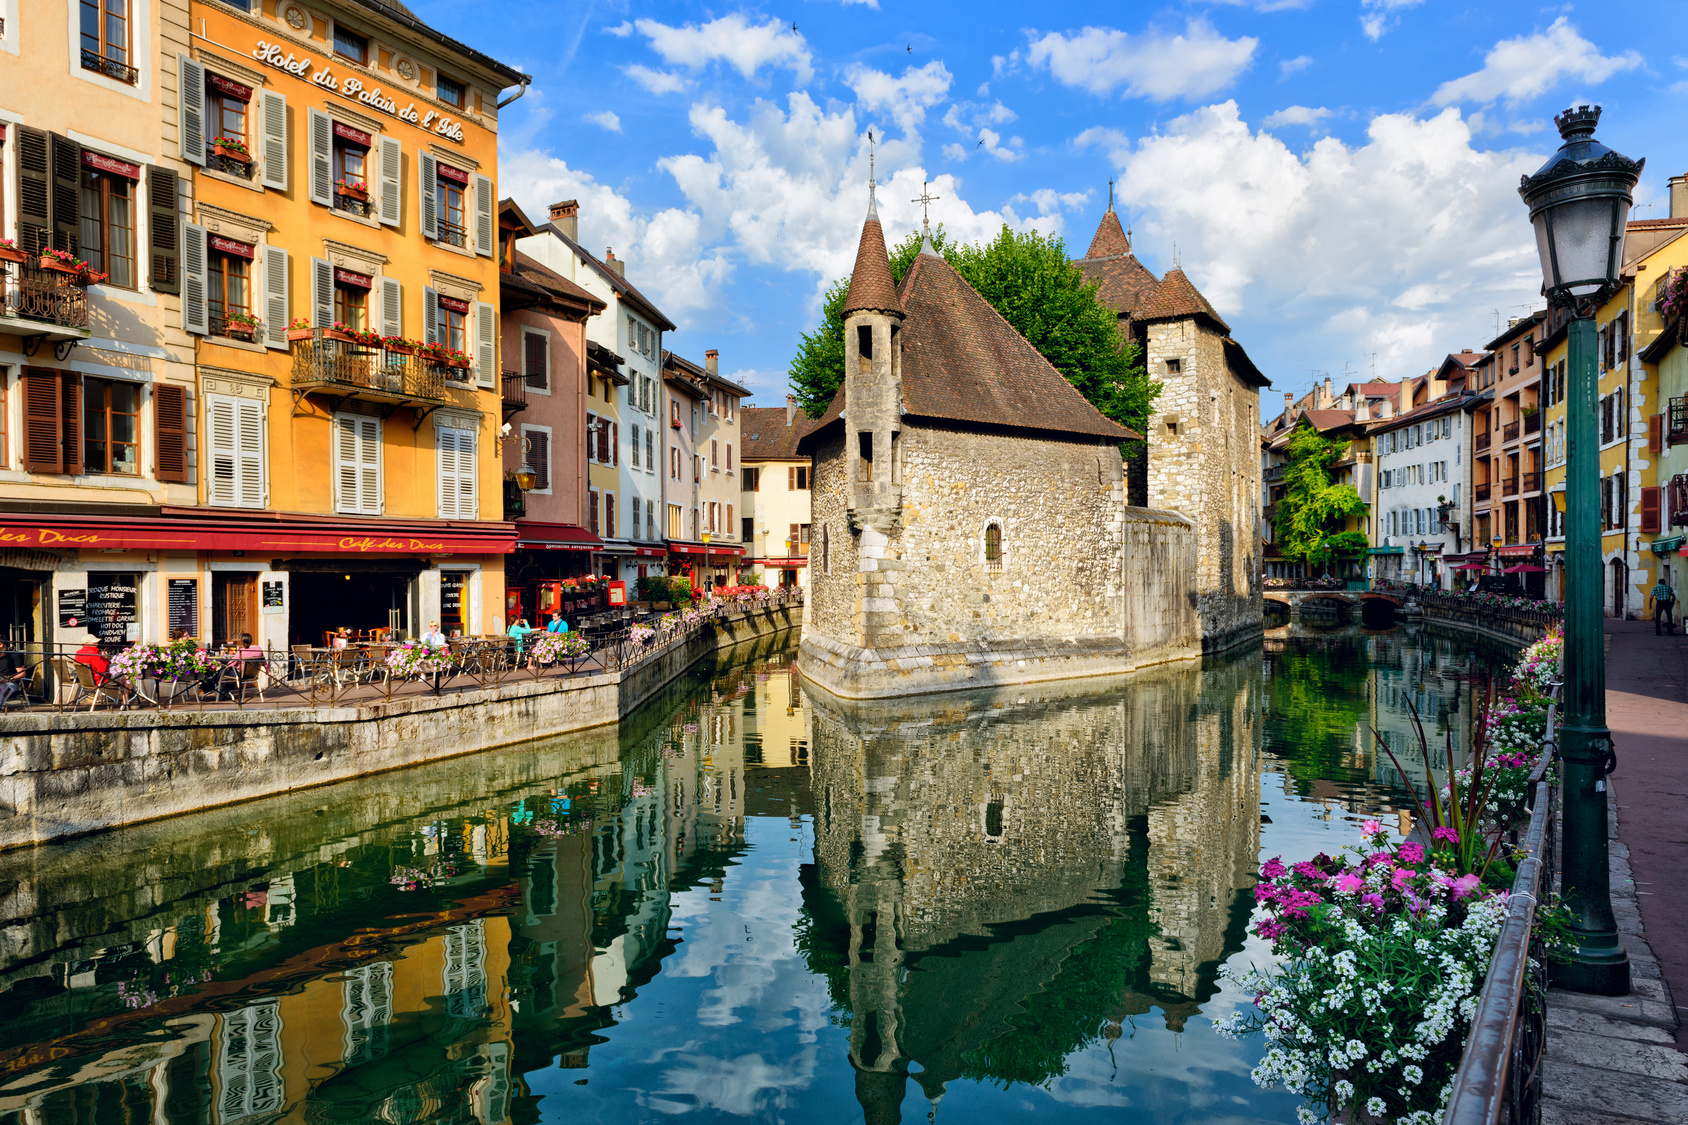 Fall in Love with Fairytale Annecy